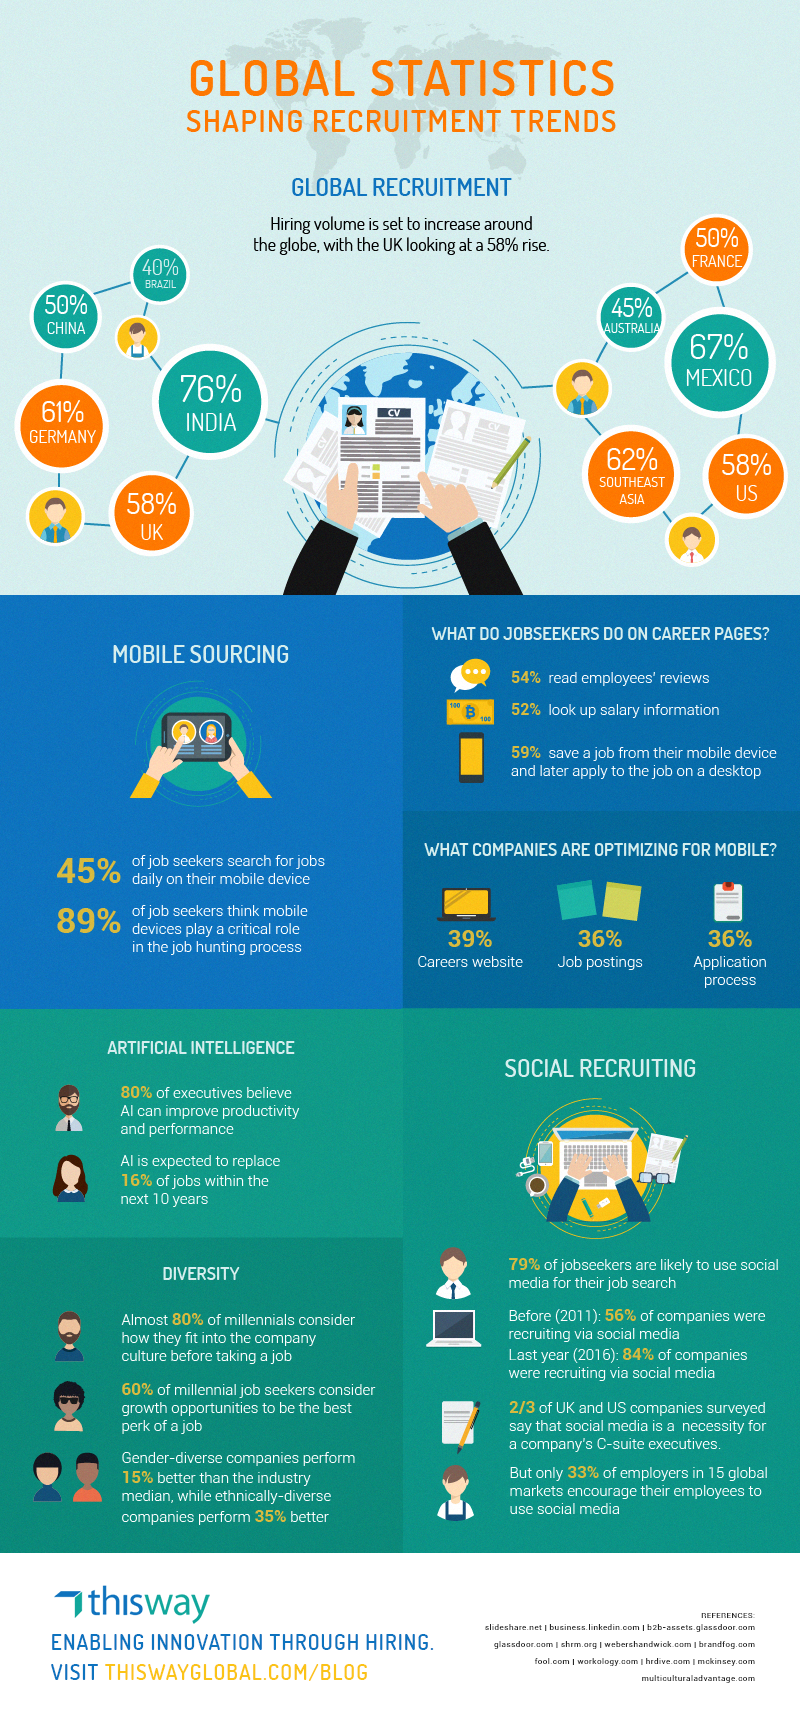 Recruiter's Guide - Global Statistics And Recruitment Trends - Infographic